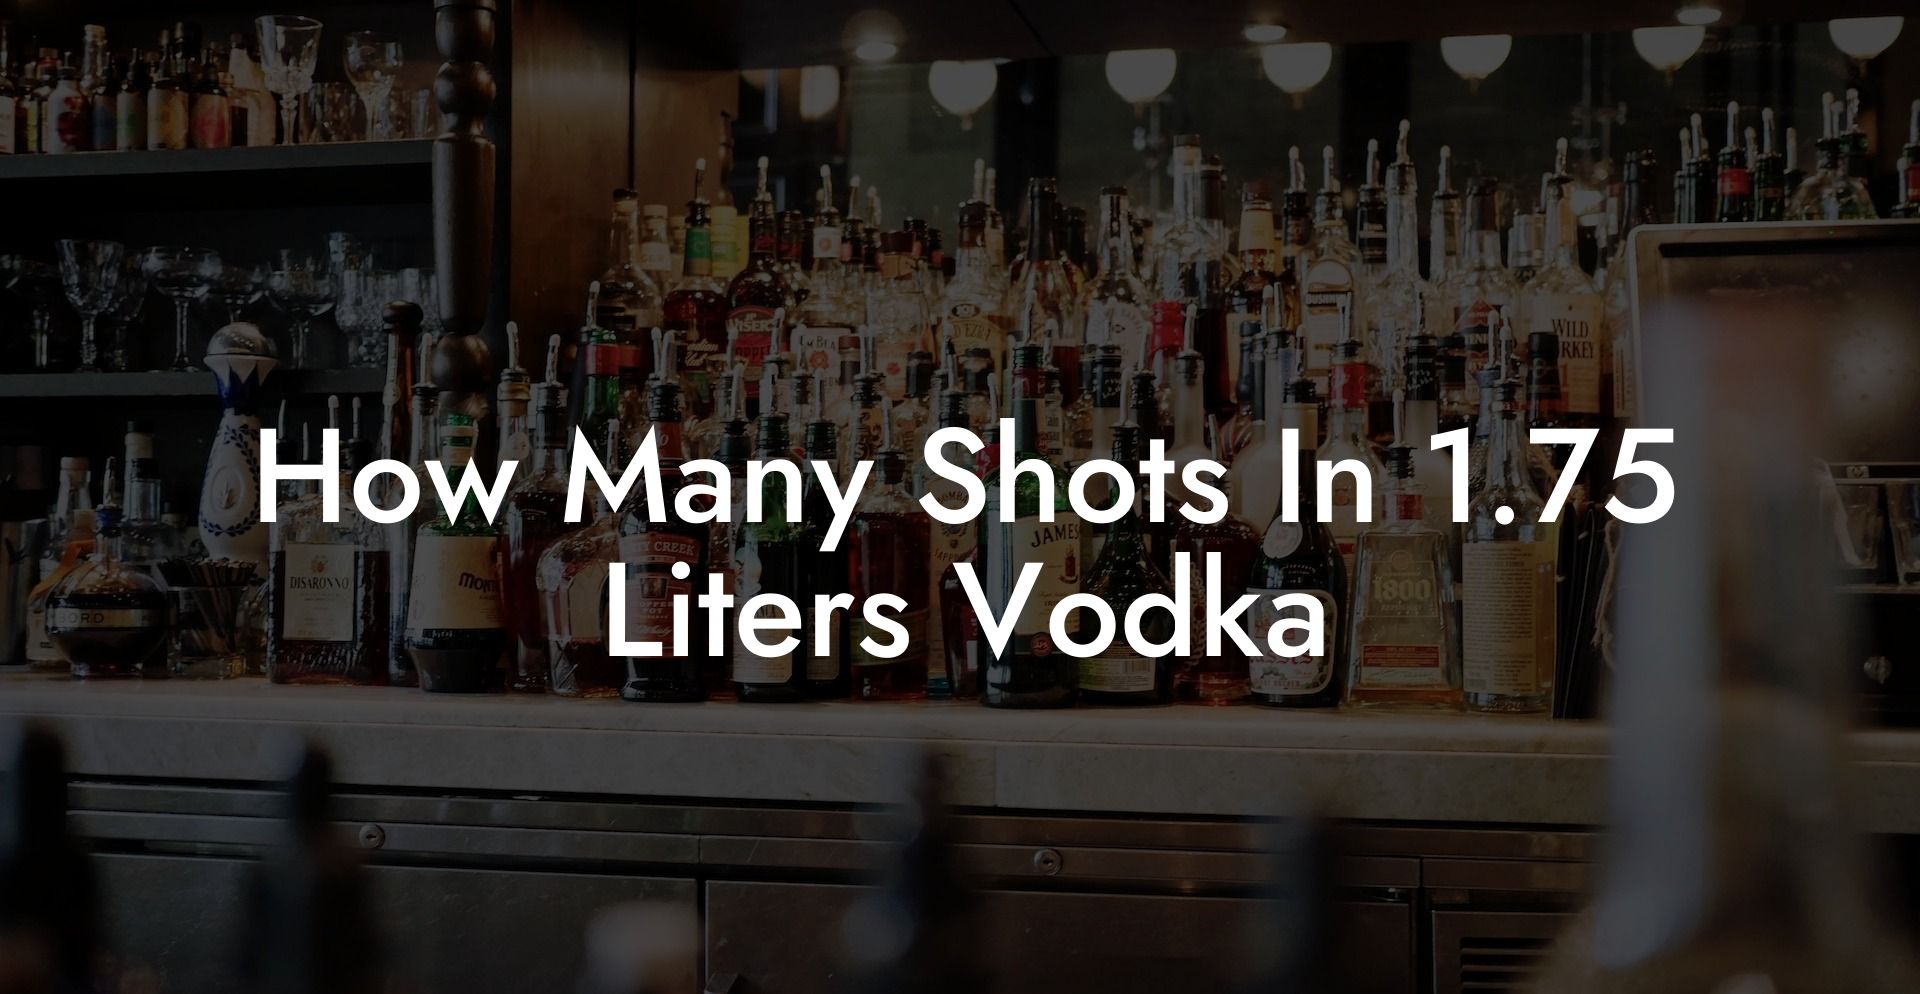 How Many Shots In 1.75 Liters Vodka